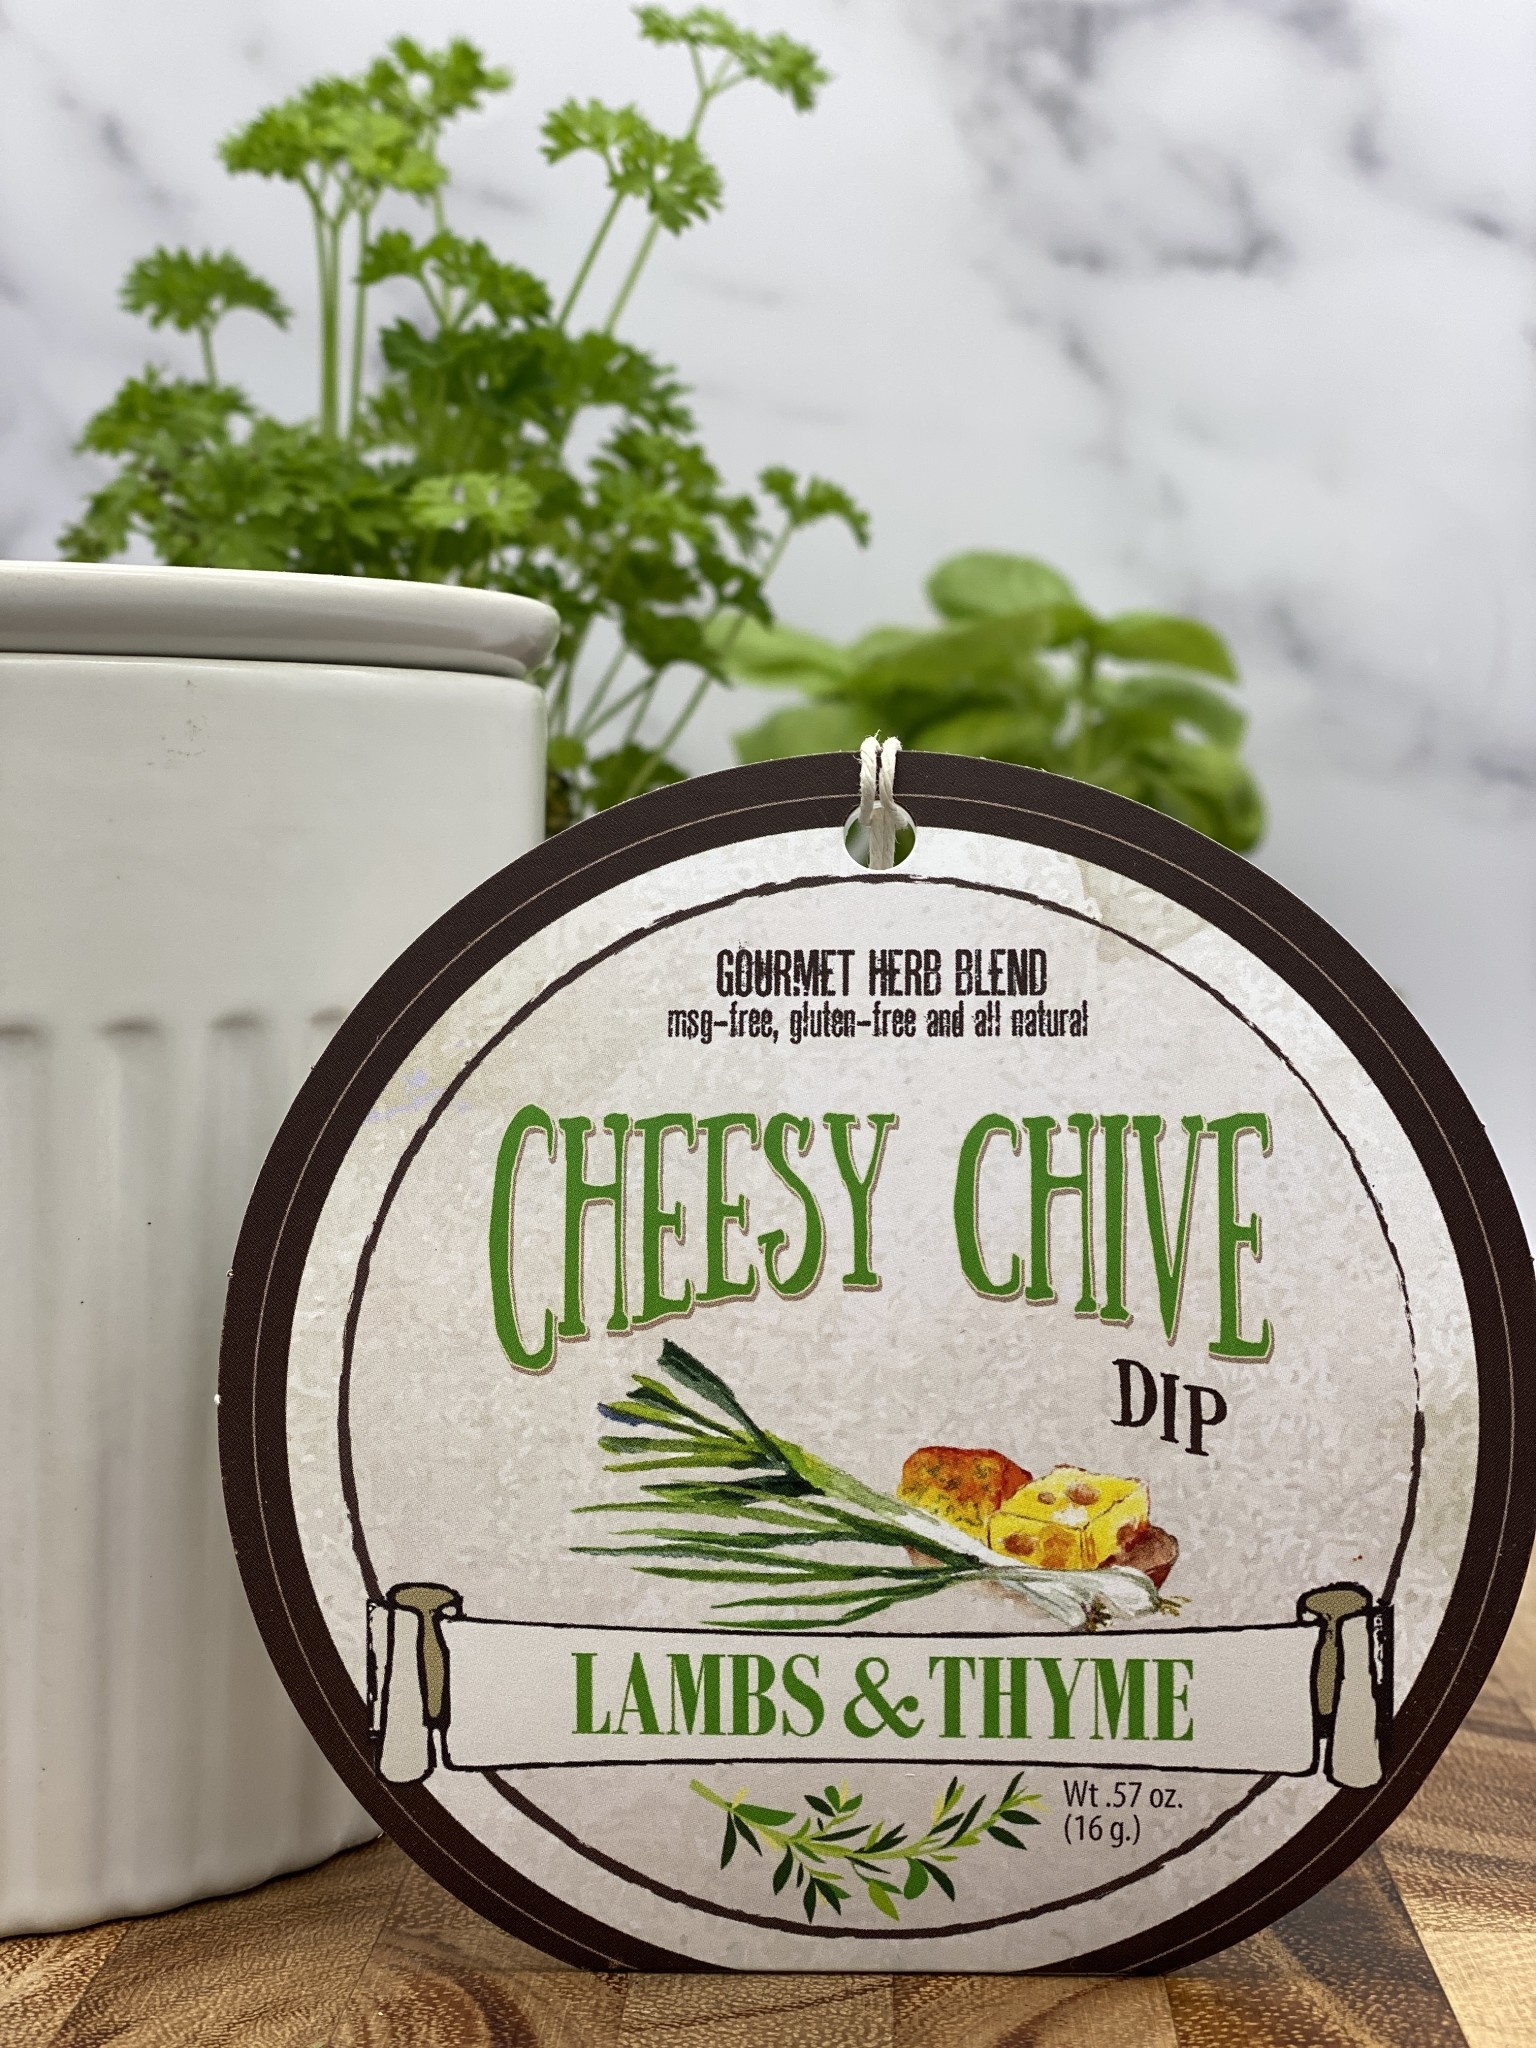 Lambs & Thyme Herb Dips Cheesy Chive